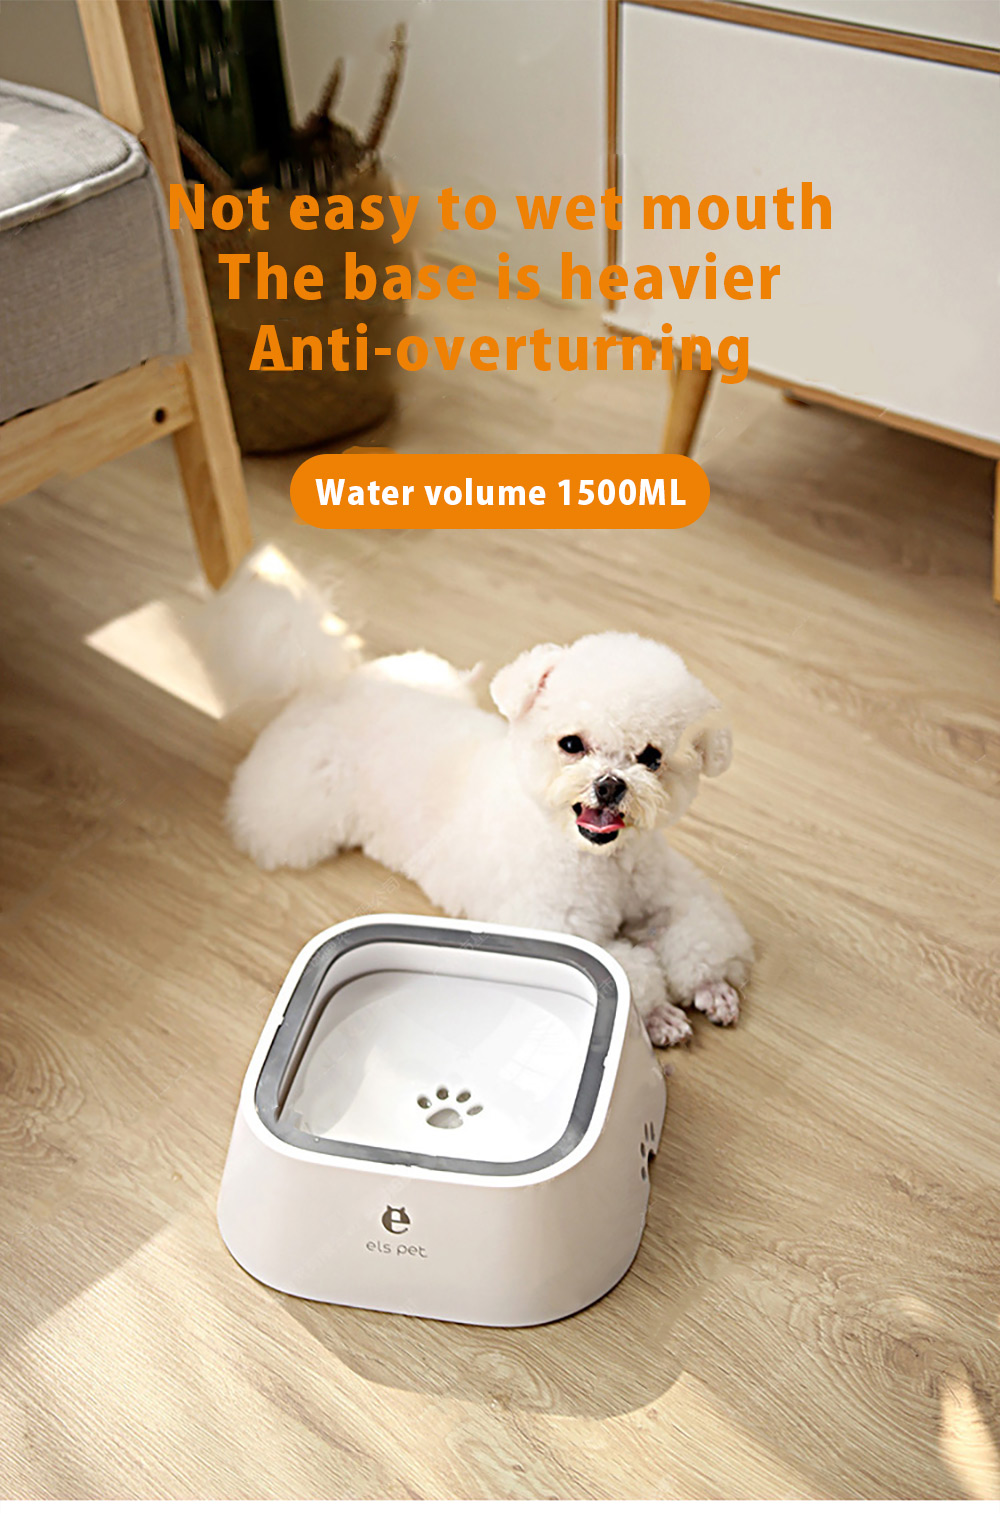 Elspet-1500ml-Dog-Water-Bowl-No-Spill-Cat-Slow-Water-Feeder-Vehicle-Carried-Floating-Disk-Pet-Suppli-1949019-1